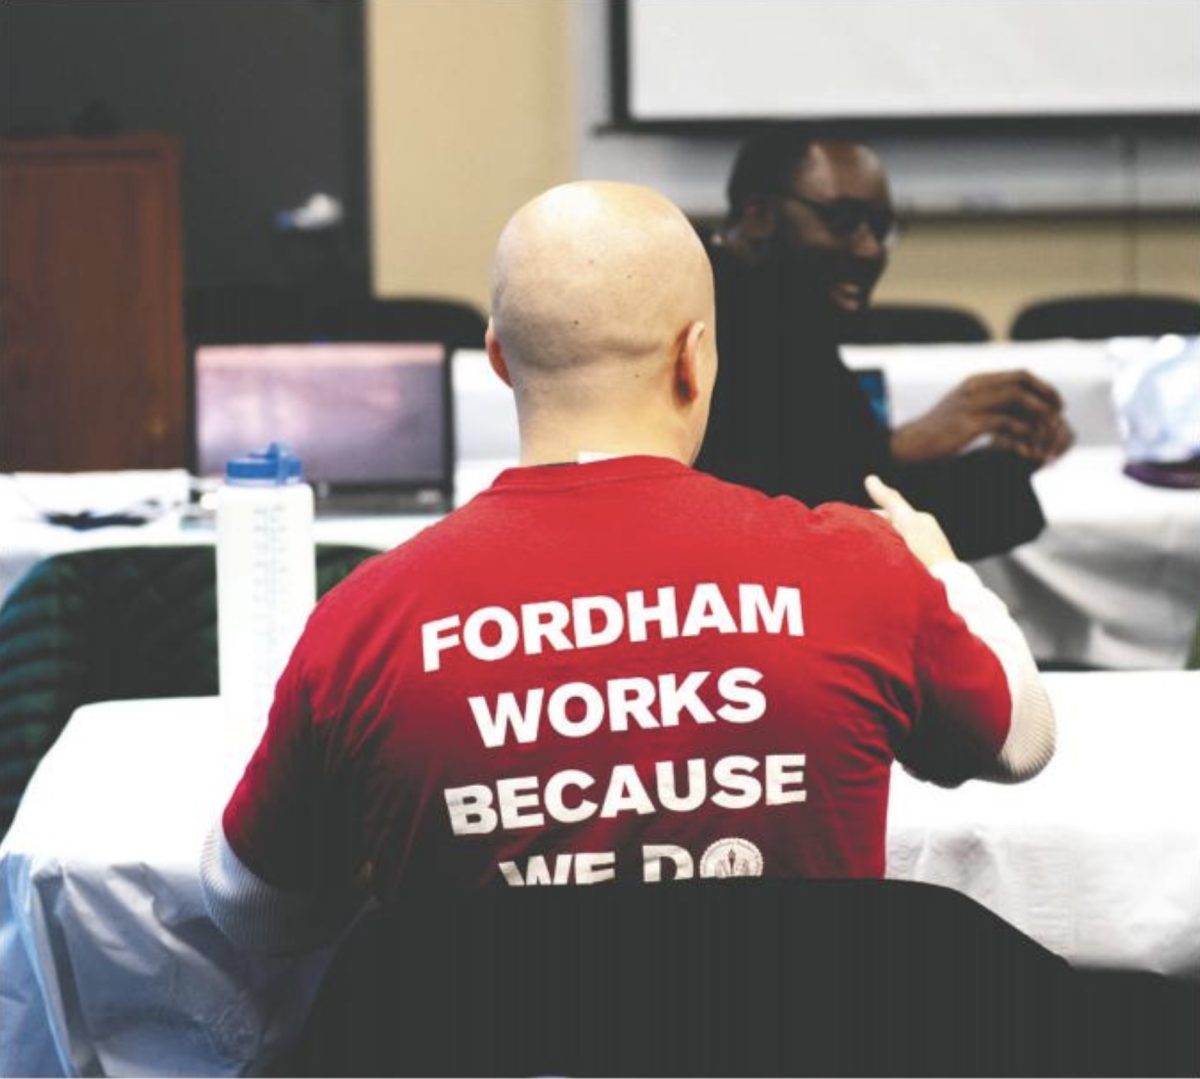 FGSW+has+been+bargaining+with+the+Fordham+administration+for+18+months.+